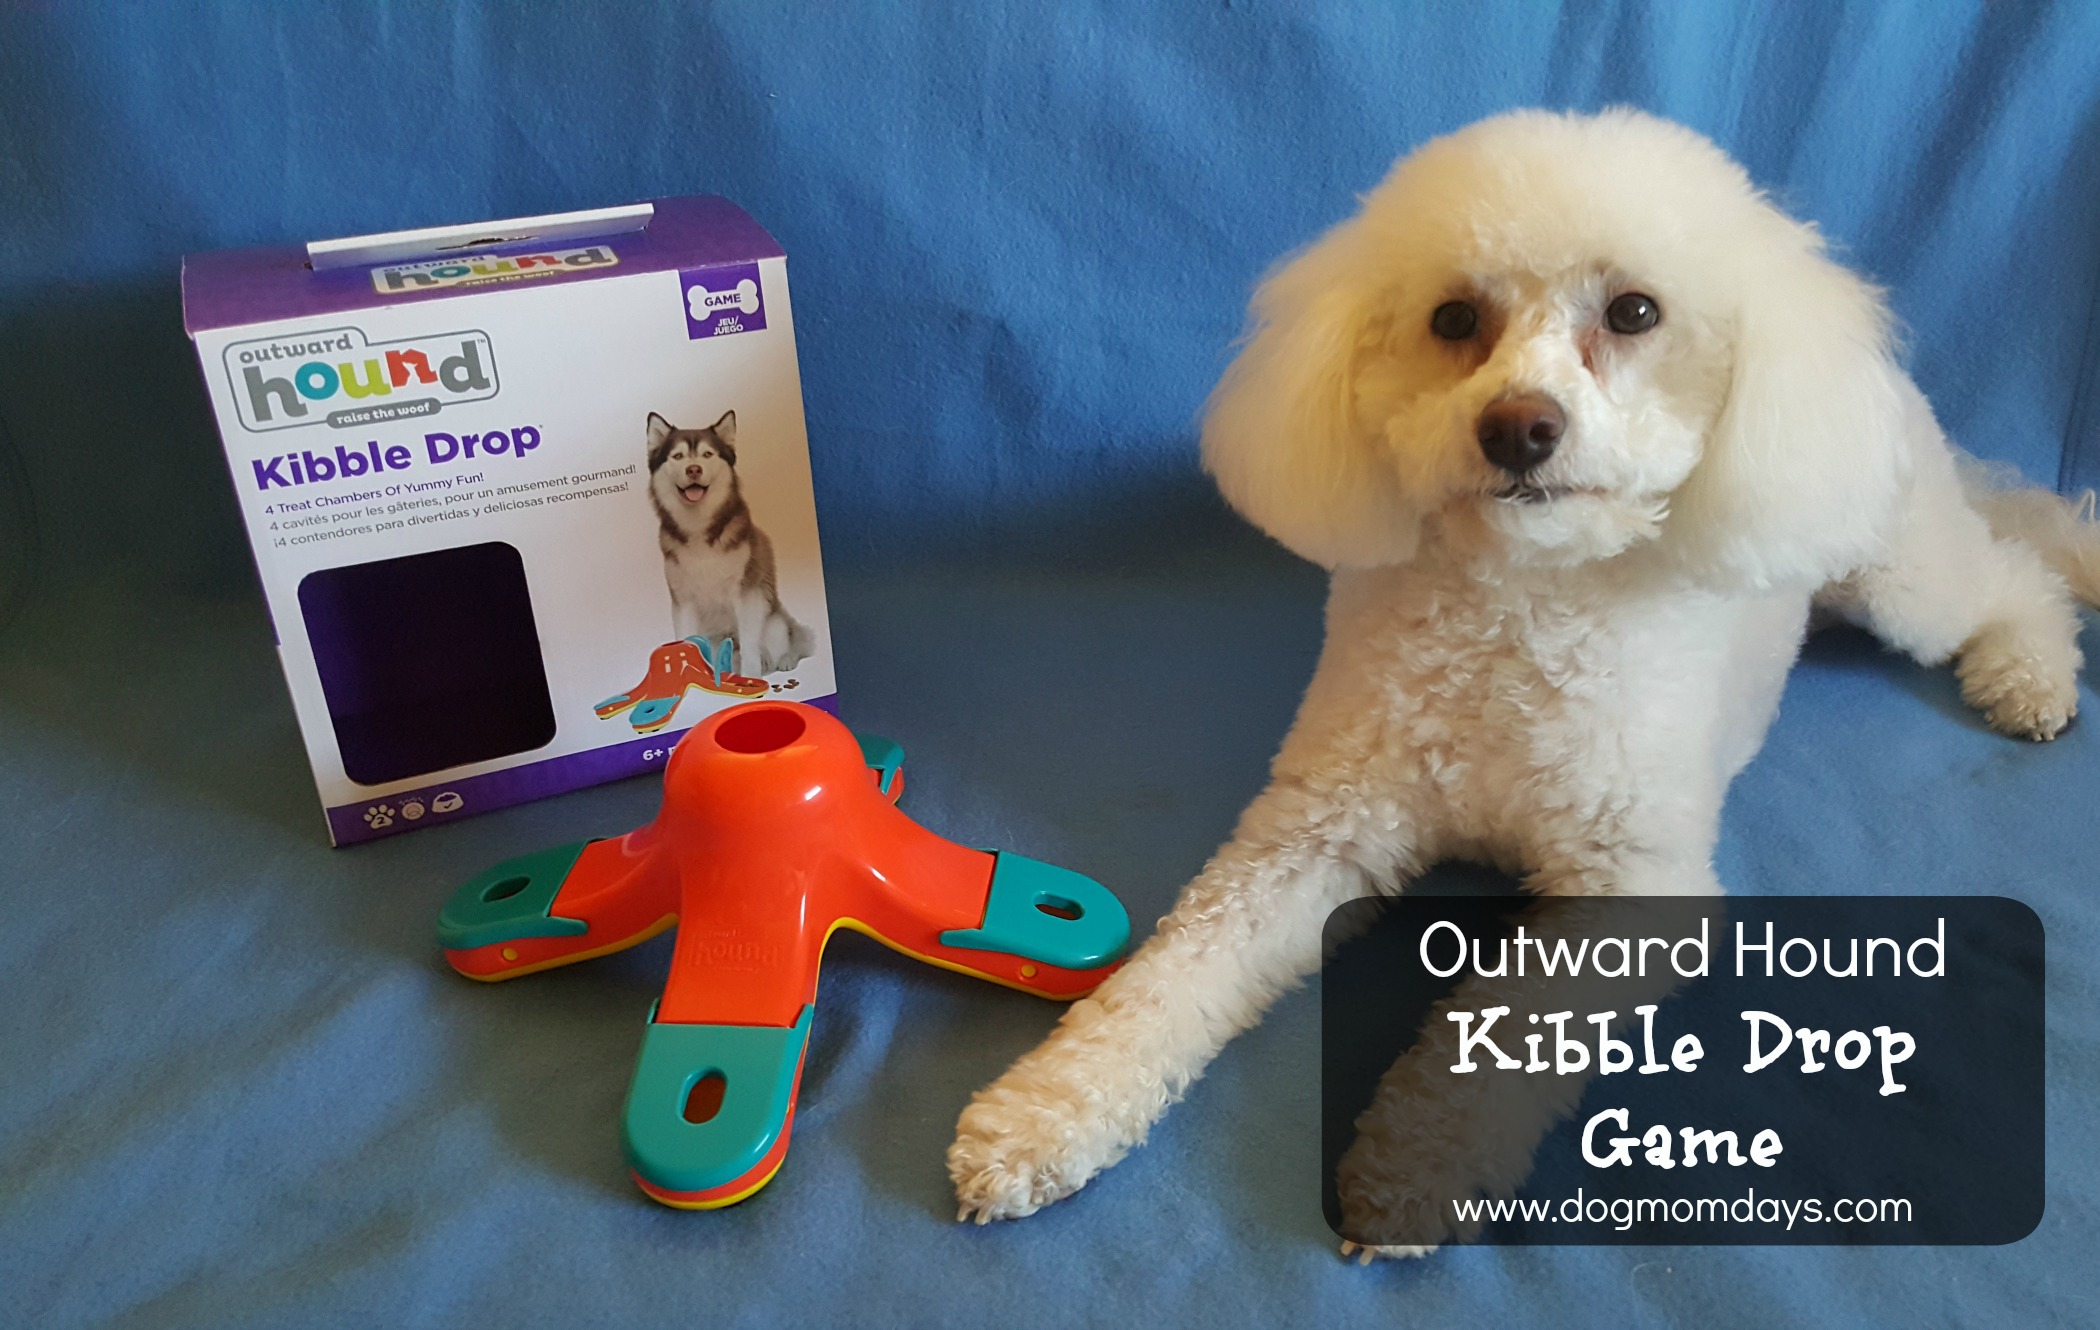 Outward Hound kibble drop game for dogs